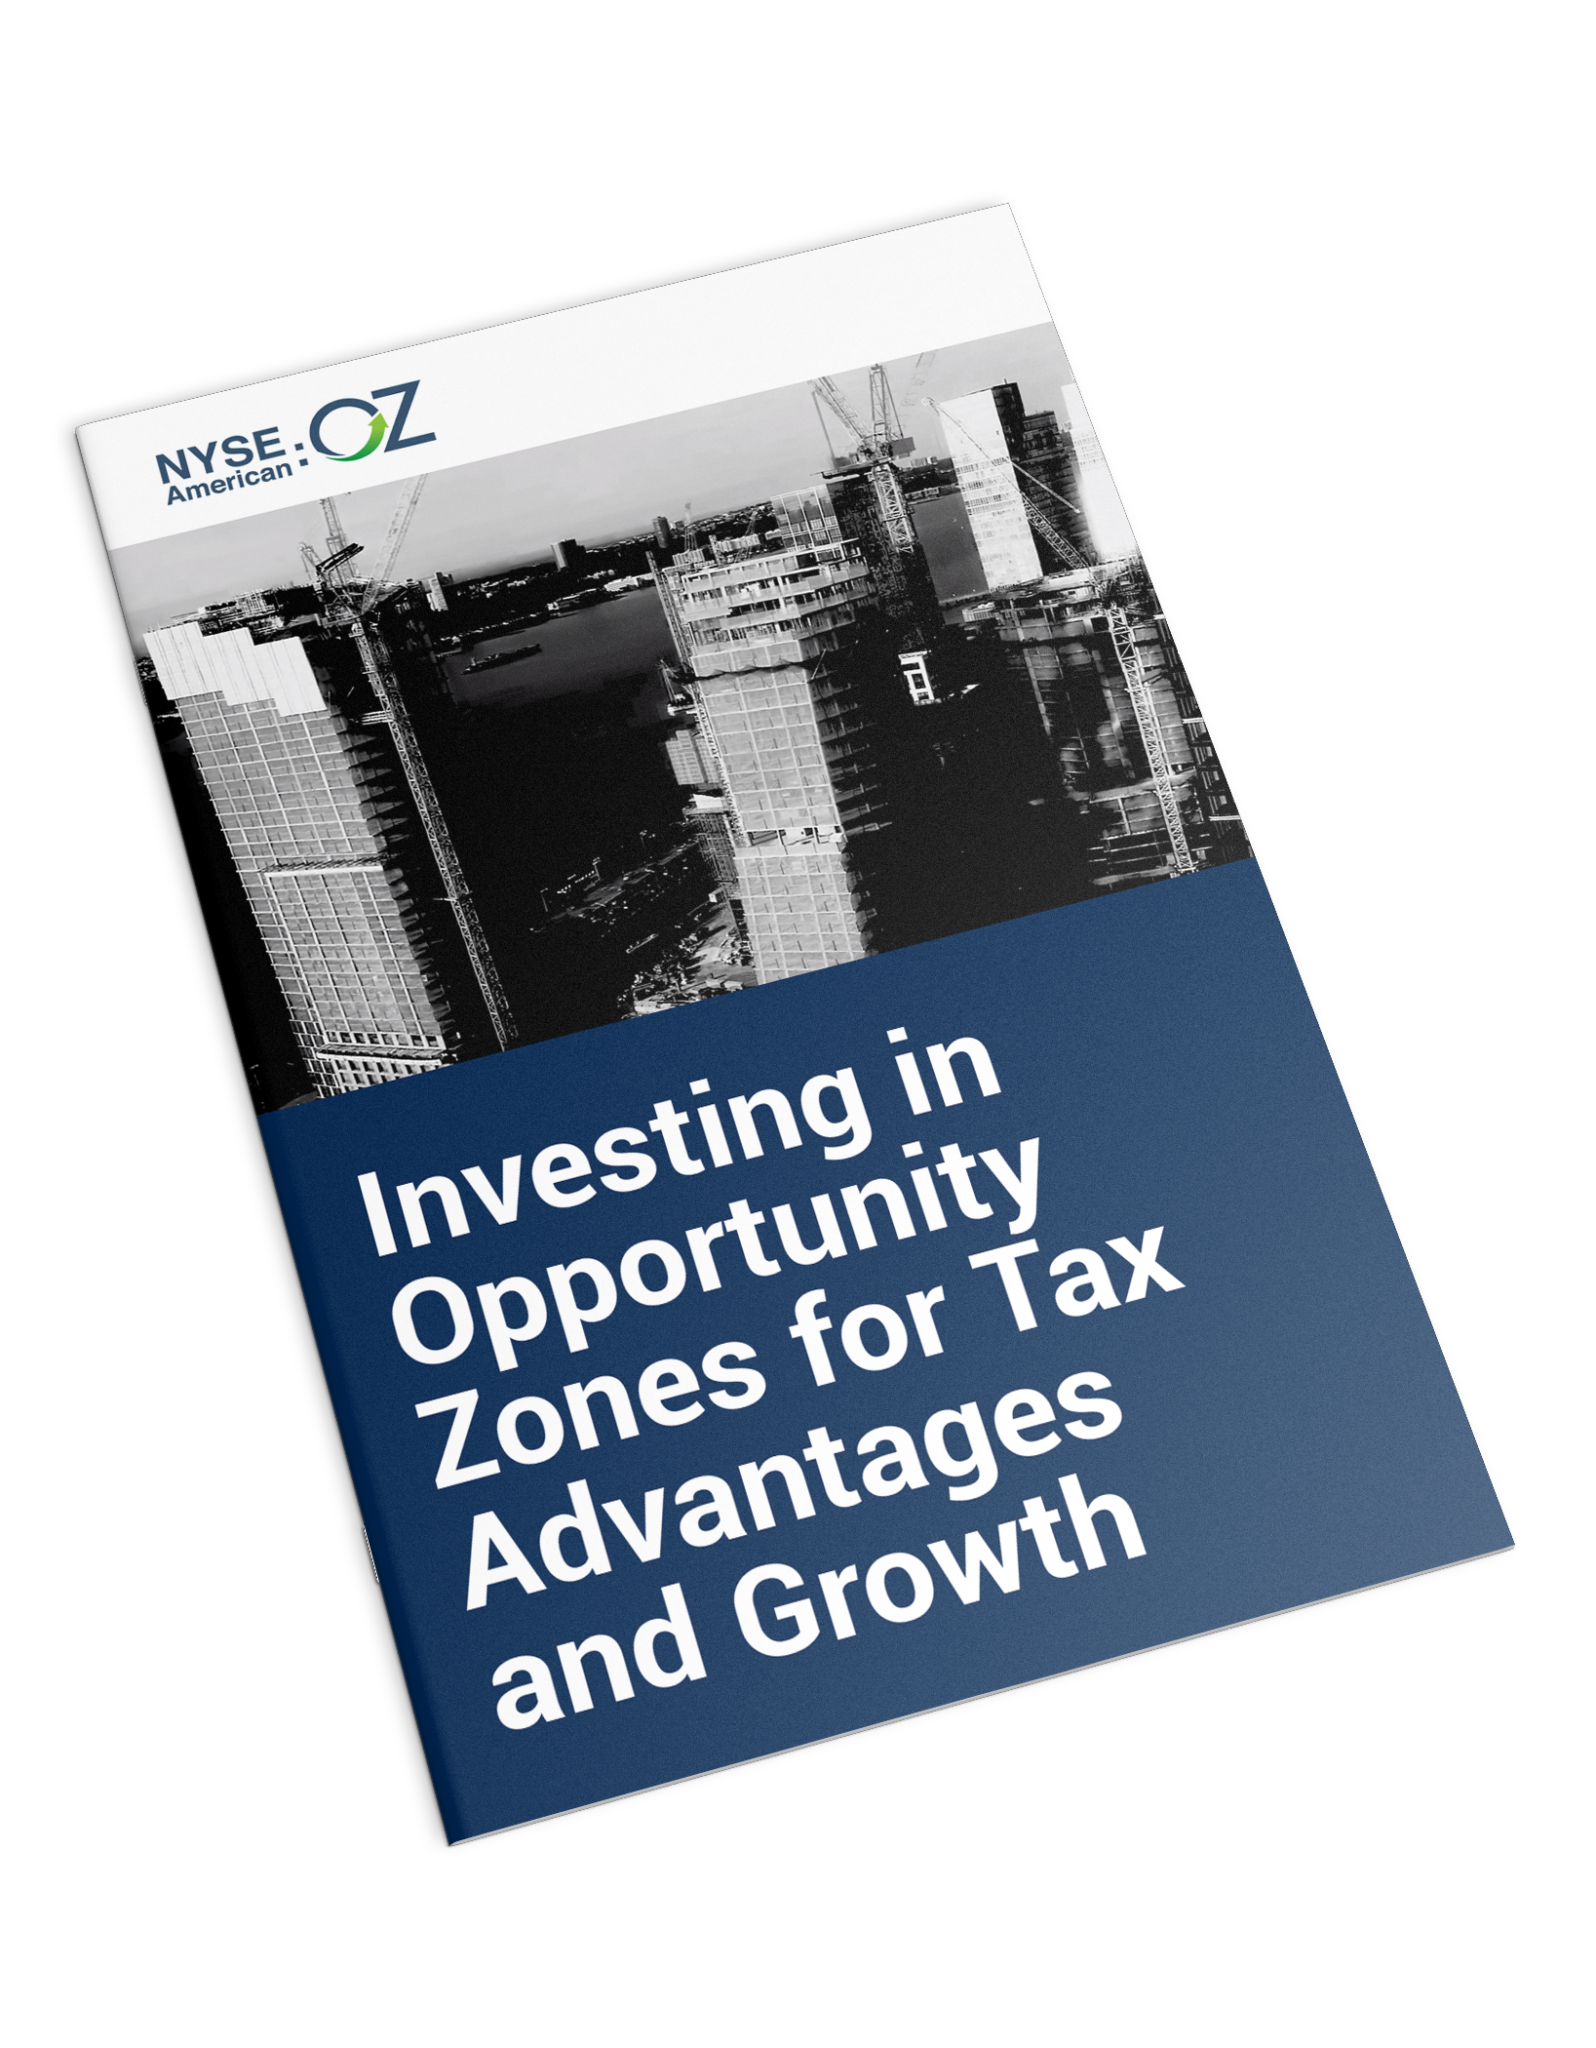 Investing in Opportunity Zones for Tax advantages and growth